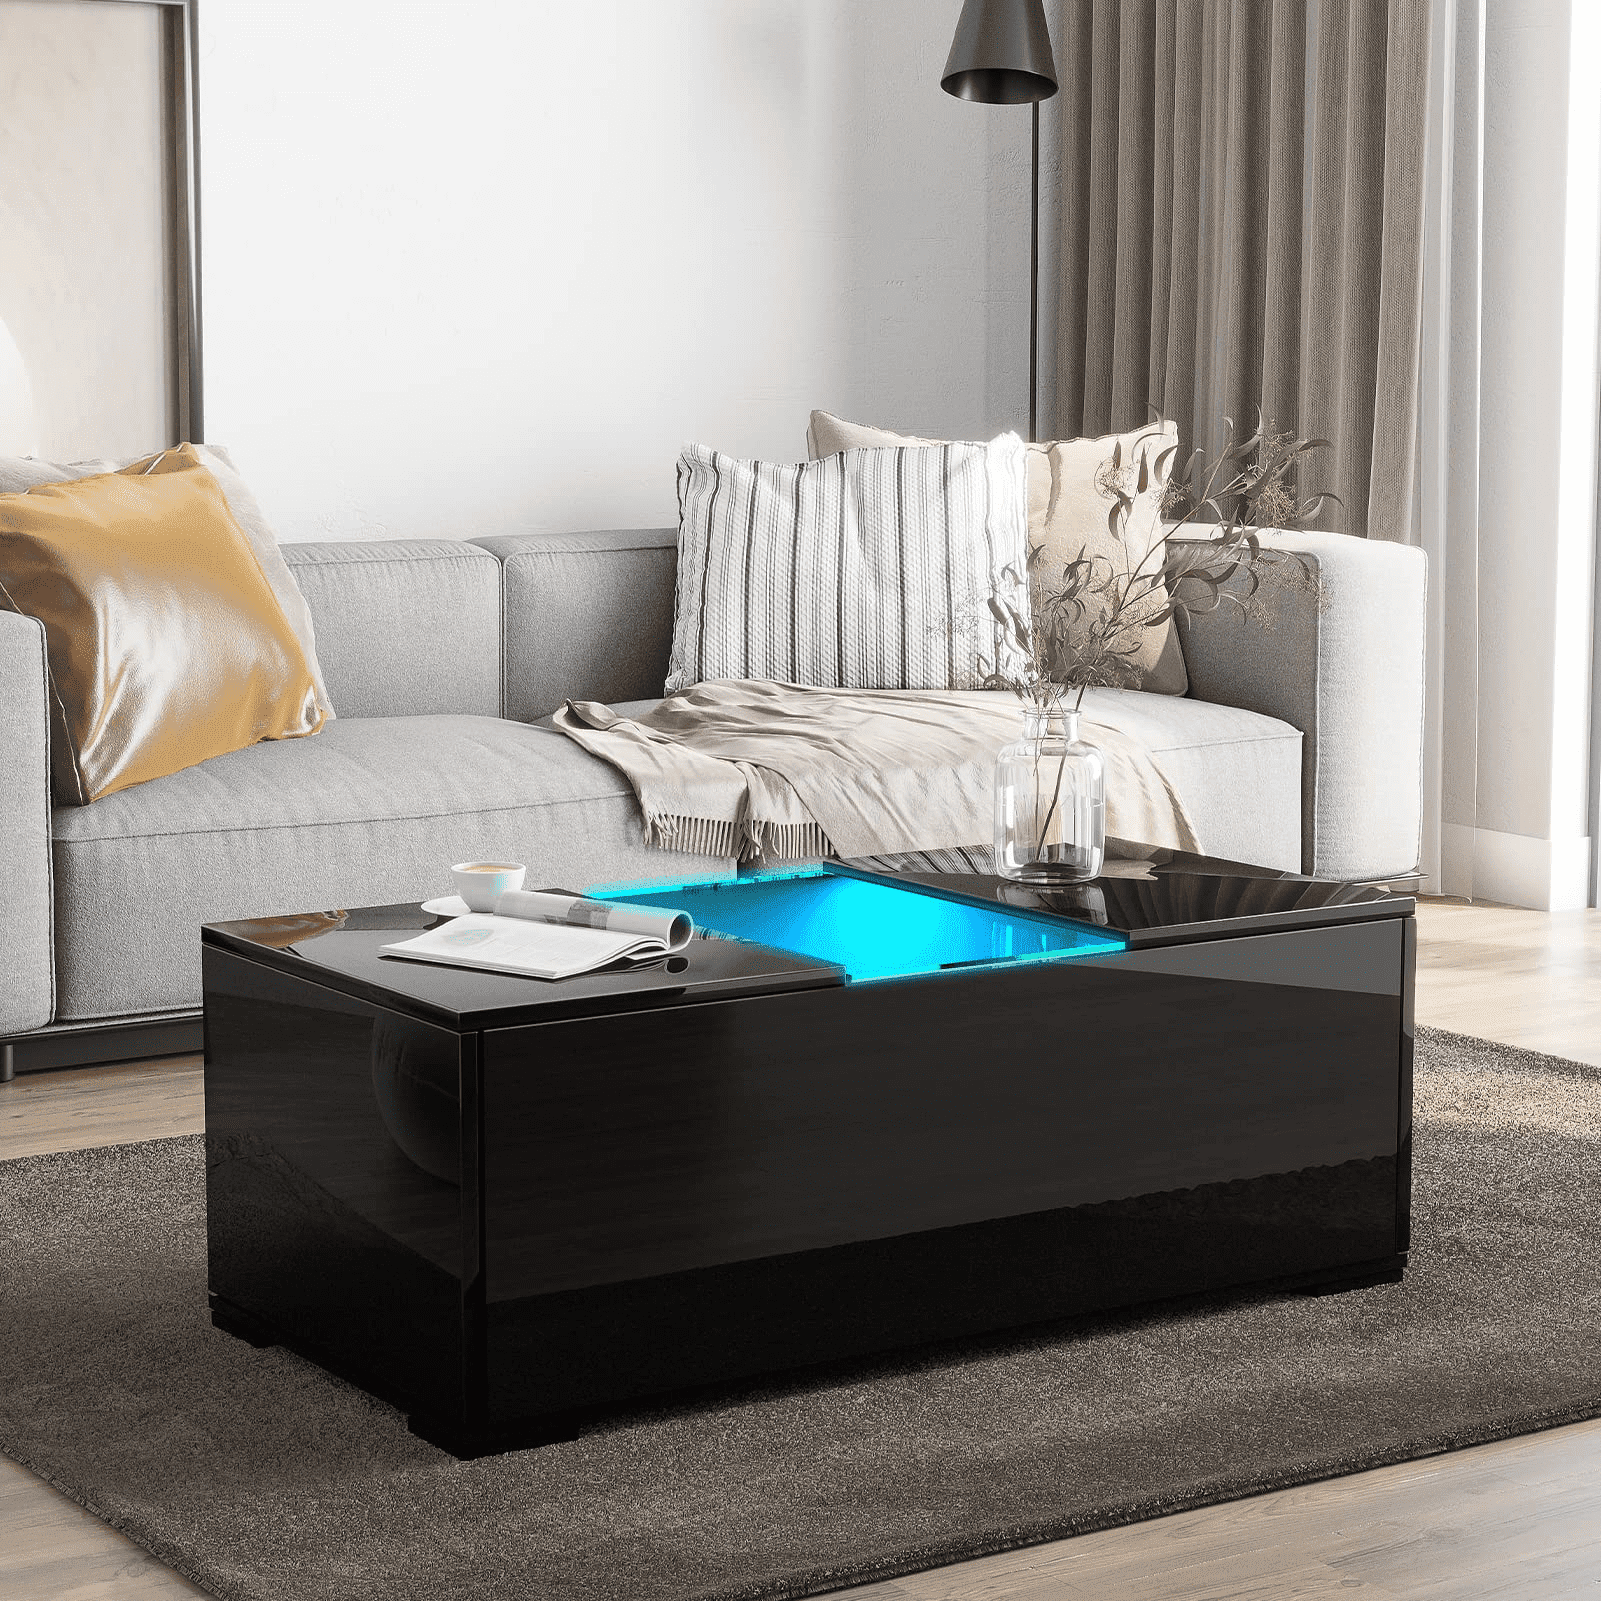 Chvans Led Coffee Tables With Storage, Rectangle High Gloss Coffee Table  With 20 Colors Led Lights For Living Room Center End Table With Glass  Tabletop & Remote – Walmart Intended For Rectangular Led Coffee Tables (View 8 of 15)